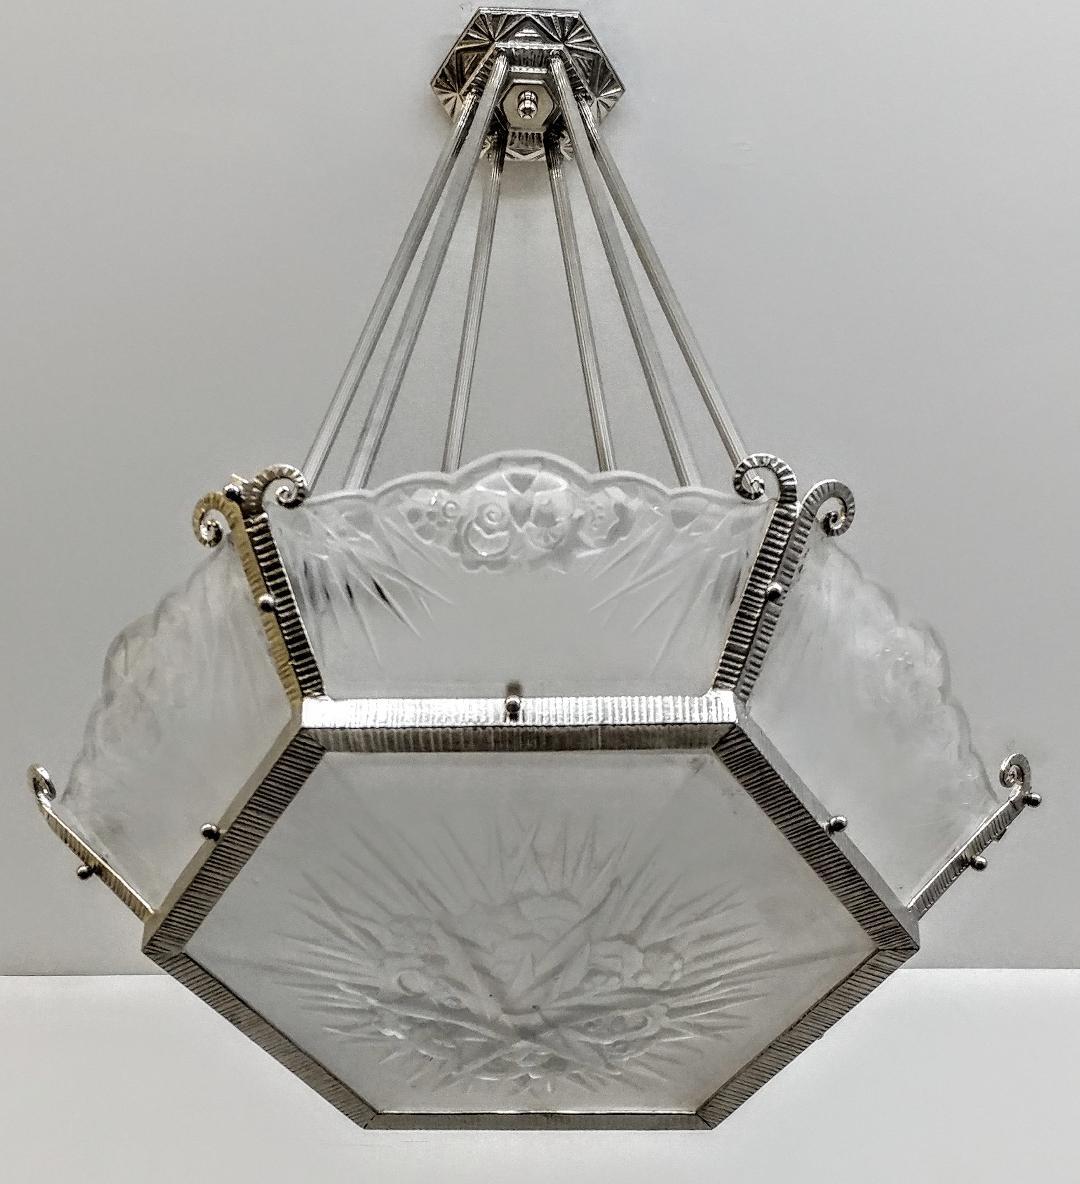 
French Art Deco chandelier by the French artist 